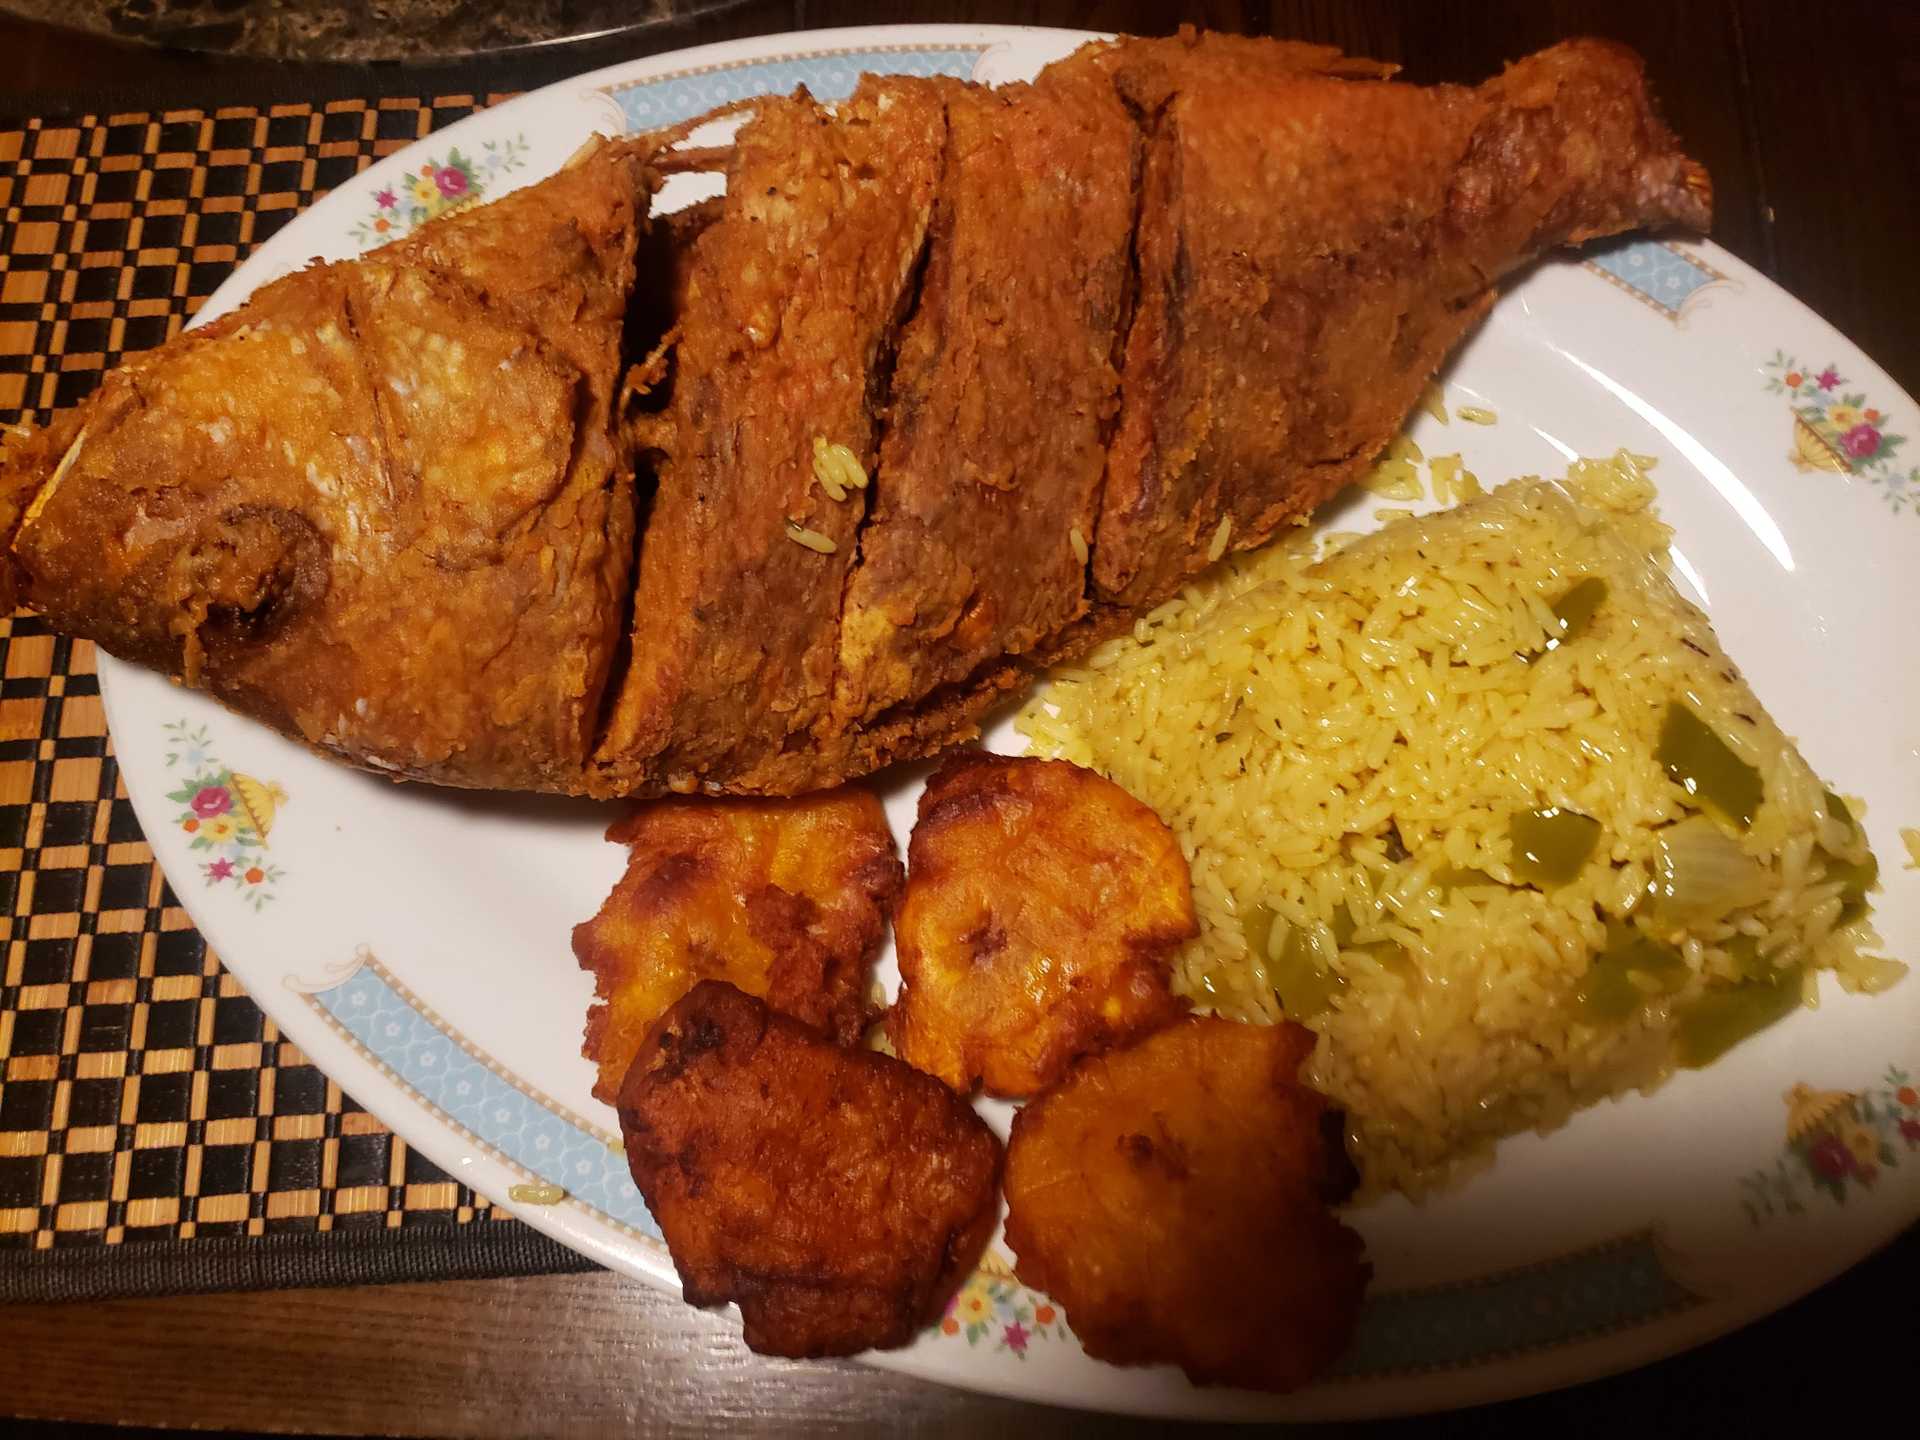 Plate of fried fish with rice and plantains.